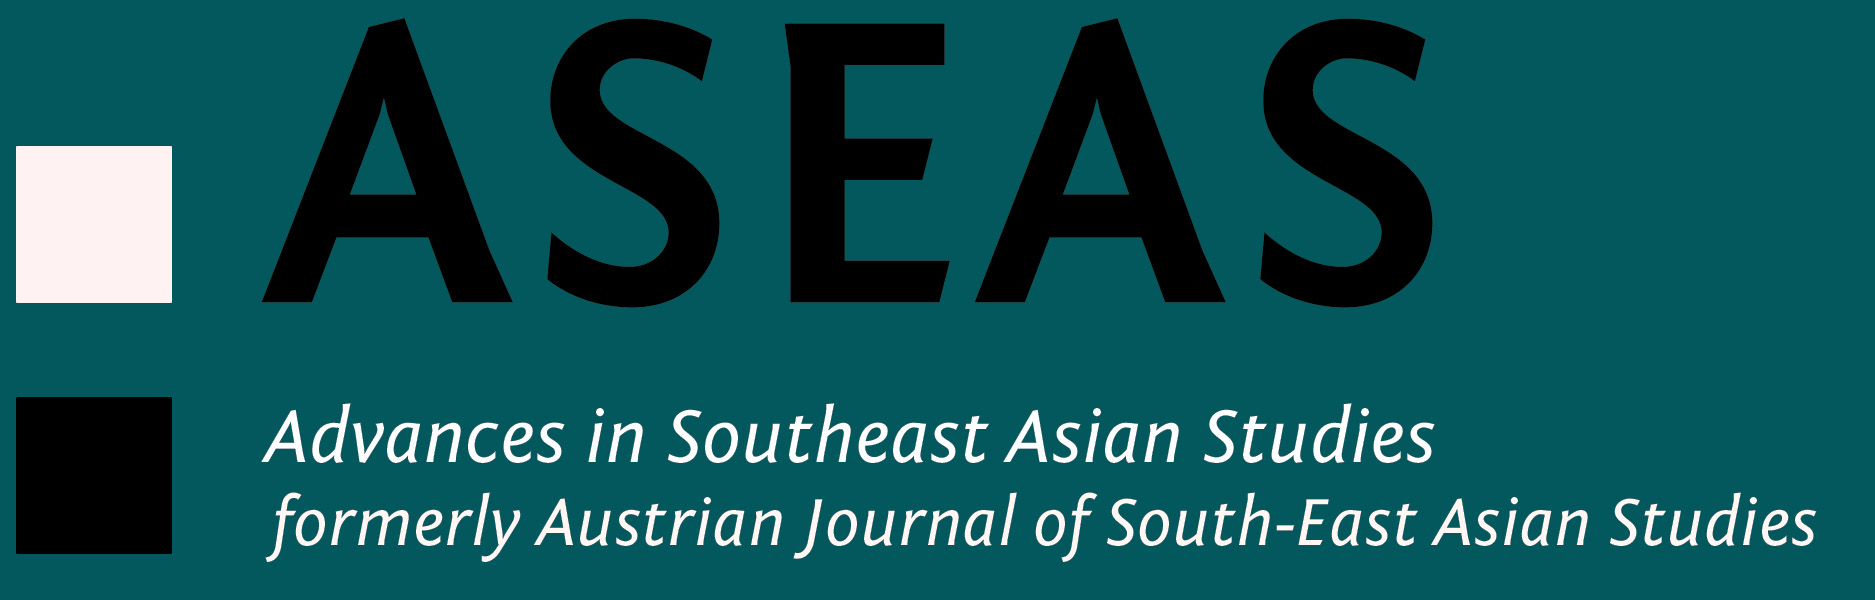 Advances in Southeast Asian Studies (formerly known as Austrian Journal of South-East Asian Studies)